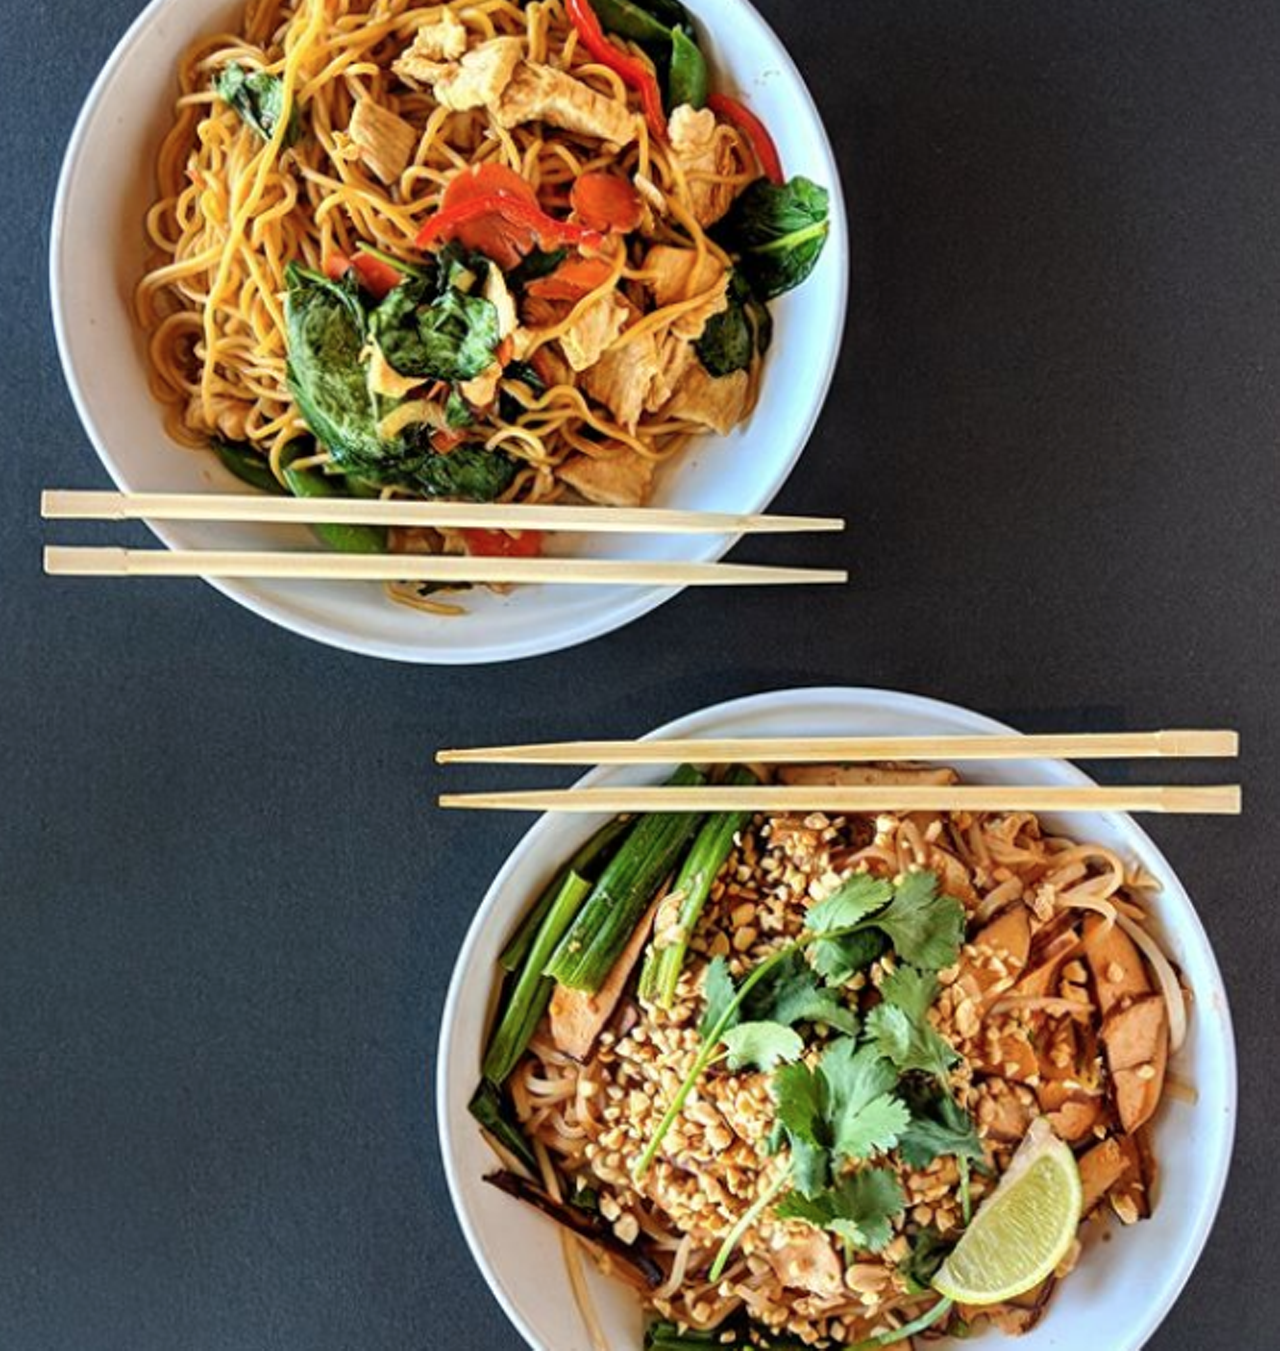 Pei Wei Asian Kitchen
Multiple locations, peiwei.com
Foodies who enjoy fast-casual Chinese bites with a take more elevated than strip mall take-out restaurants can rest easy with Pei Wei. Based in Irving, this Asian kitchen chain brings all the classic dishes you know and love.
Photo via Instagram / peiweiasiankitchen